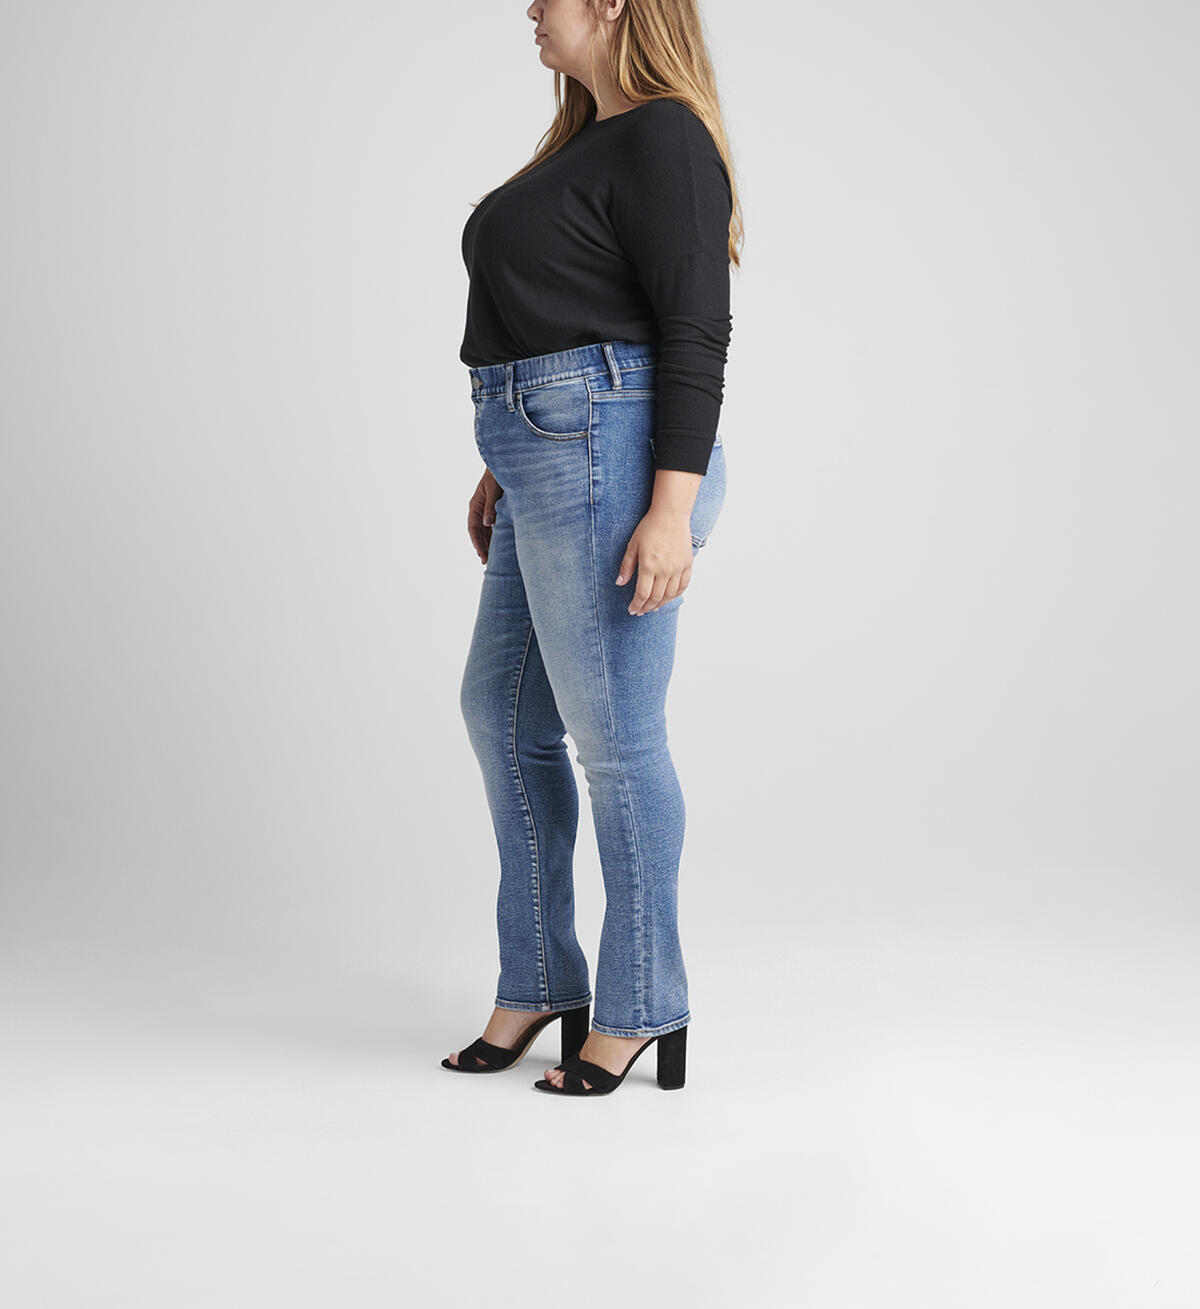 Valentina High Rise Straight Leg Pull-On Jeans Plus Size, , hi-res image number 2